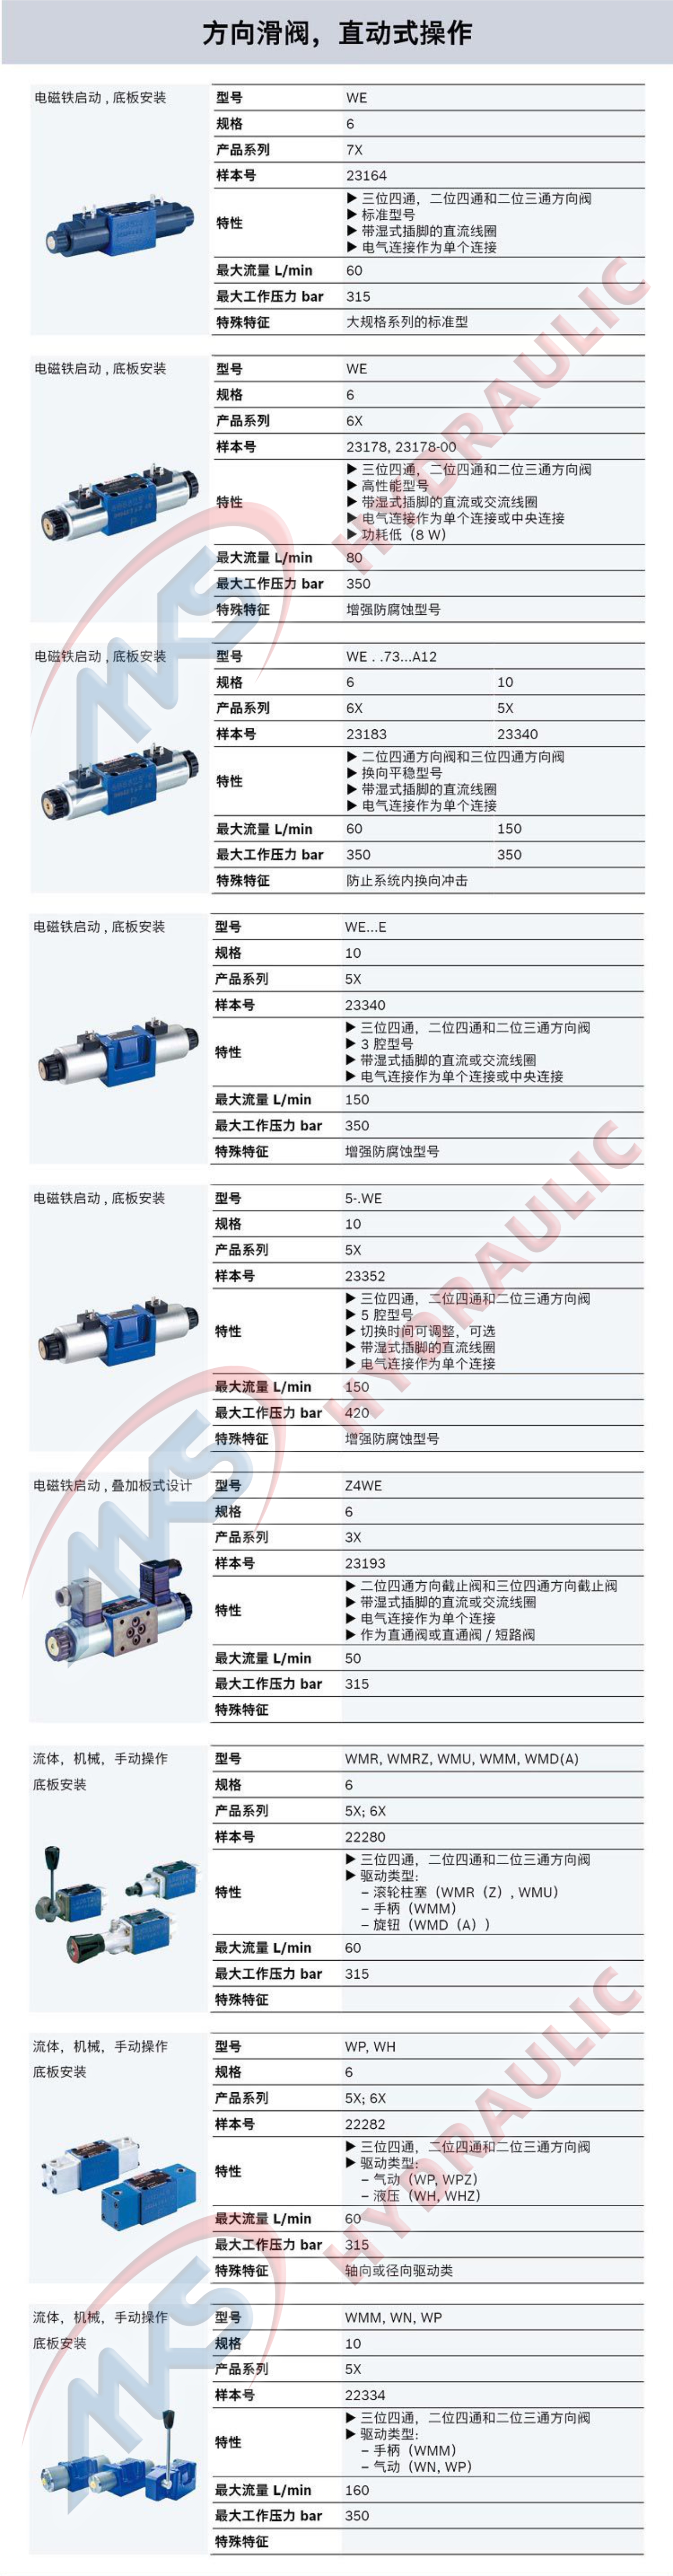 Directional spool valves, Direct operated